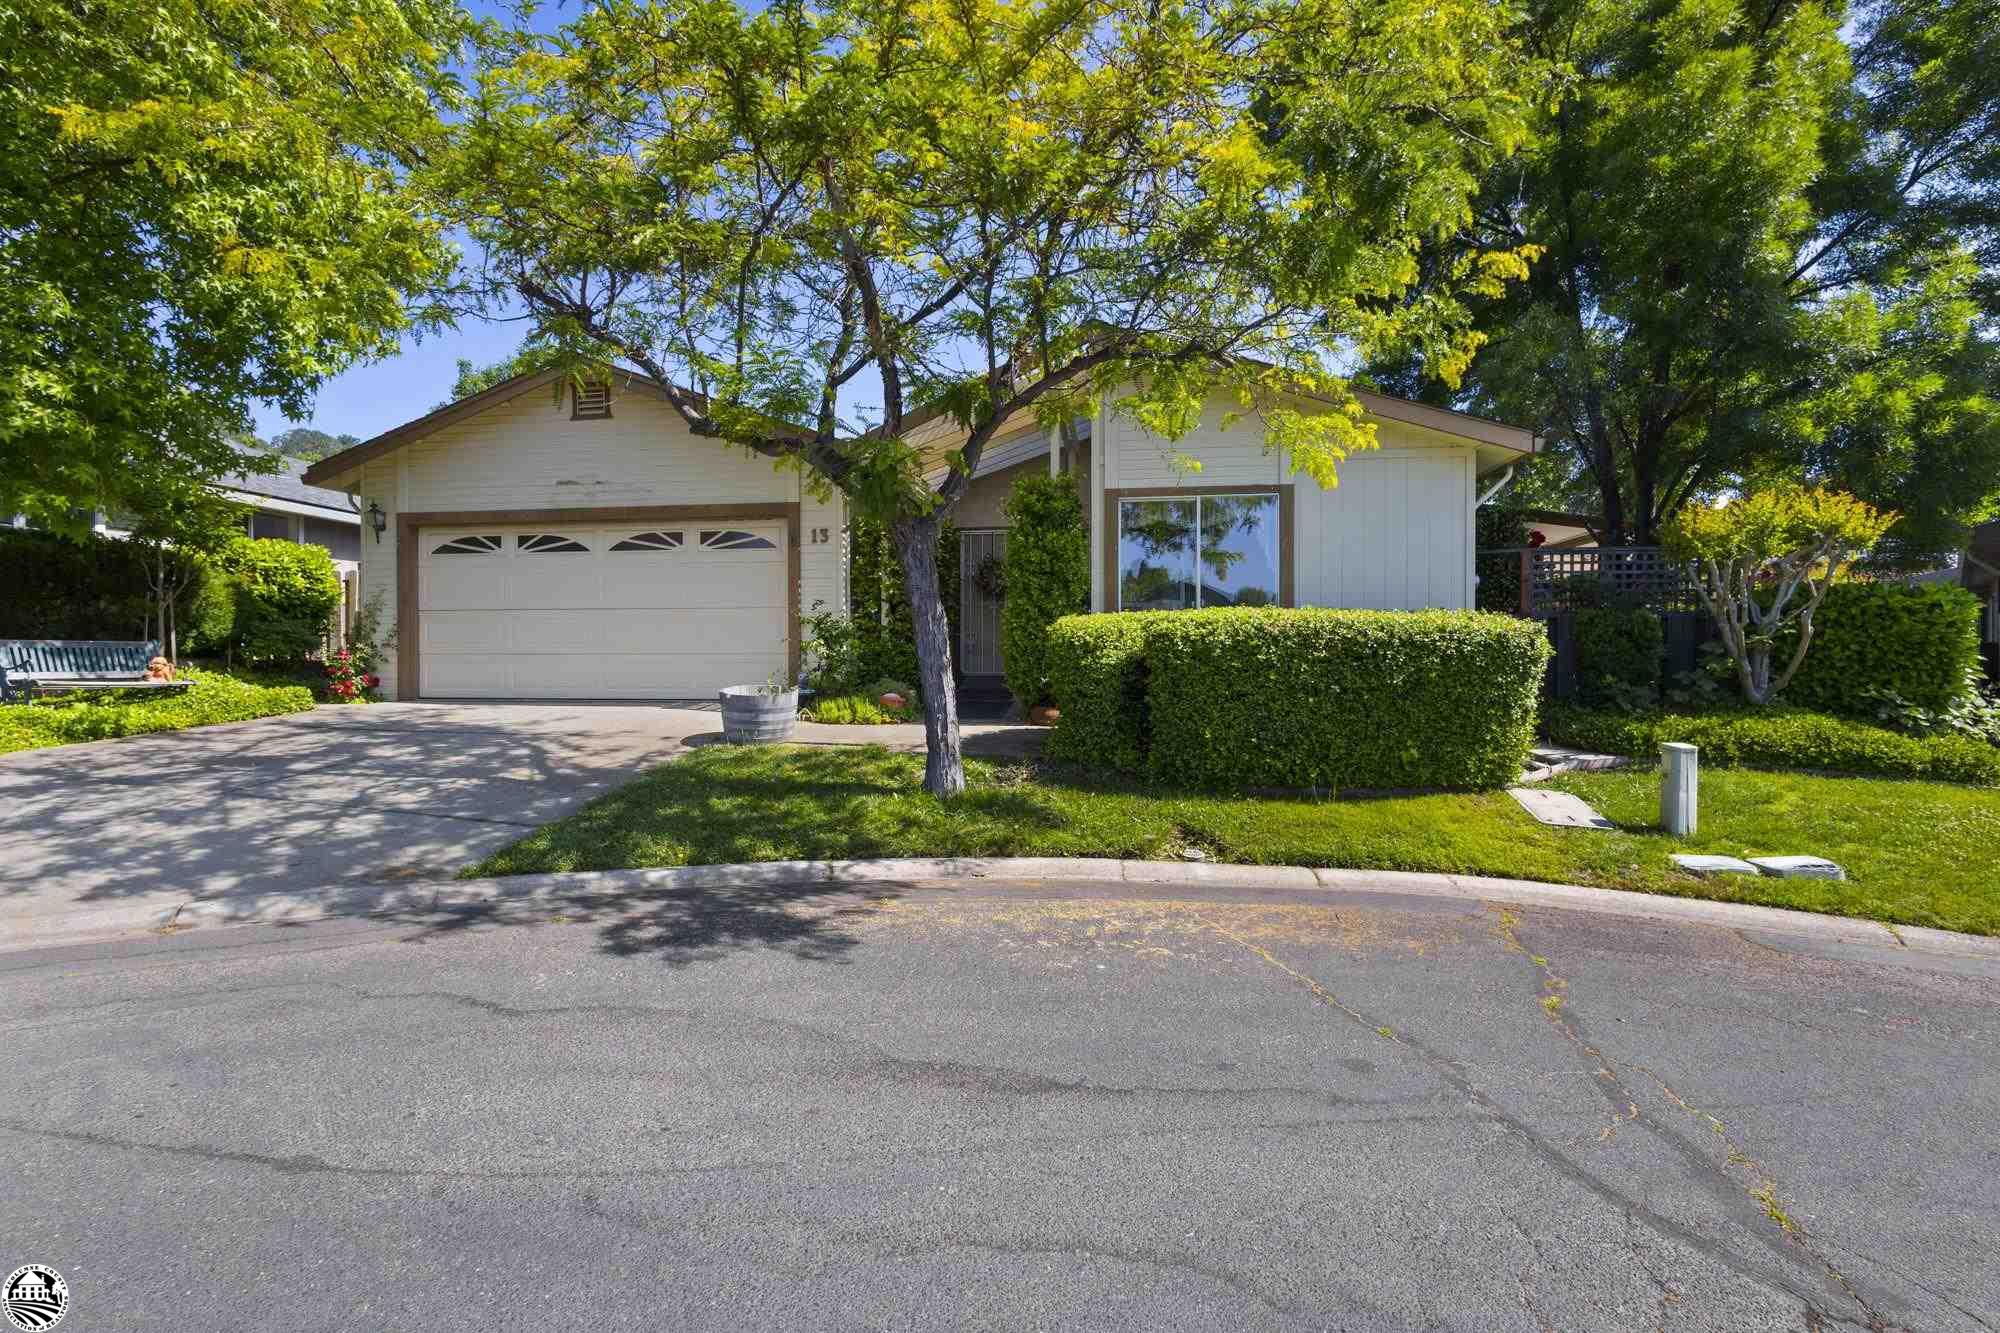 Impressively large home in the gated community of Sonora Hills. Bring your vision and grab a rare home with over 1900 SF and both side yards, including a workshop with power and ventilation! The 3rd bedroom is a den, modified with an add-on craft room. Located on a nice quiet cul-de-sac, with beautiful mature trees. The deck off the living room and master bedroom is shaded extensively, and built to last. The small deck off the formal dining area is a great spot to enjoy the evening with after-dinner drinks. Also included, just a few steps from the laundry room door, is a workshop with power, and a cute little covered porch. Part of Sonora Hills 55+ gated Senior Community